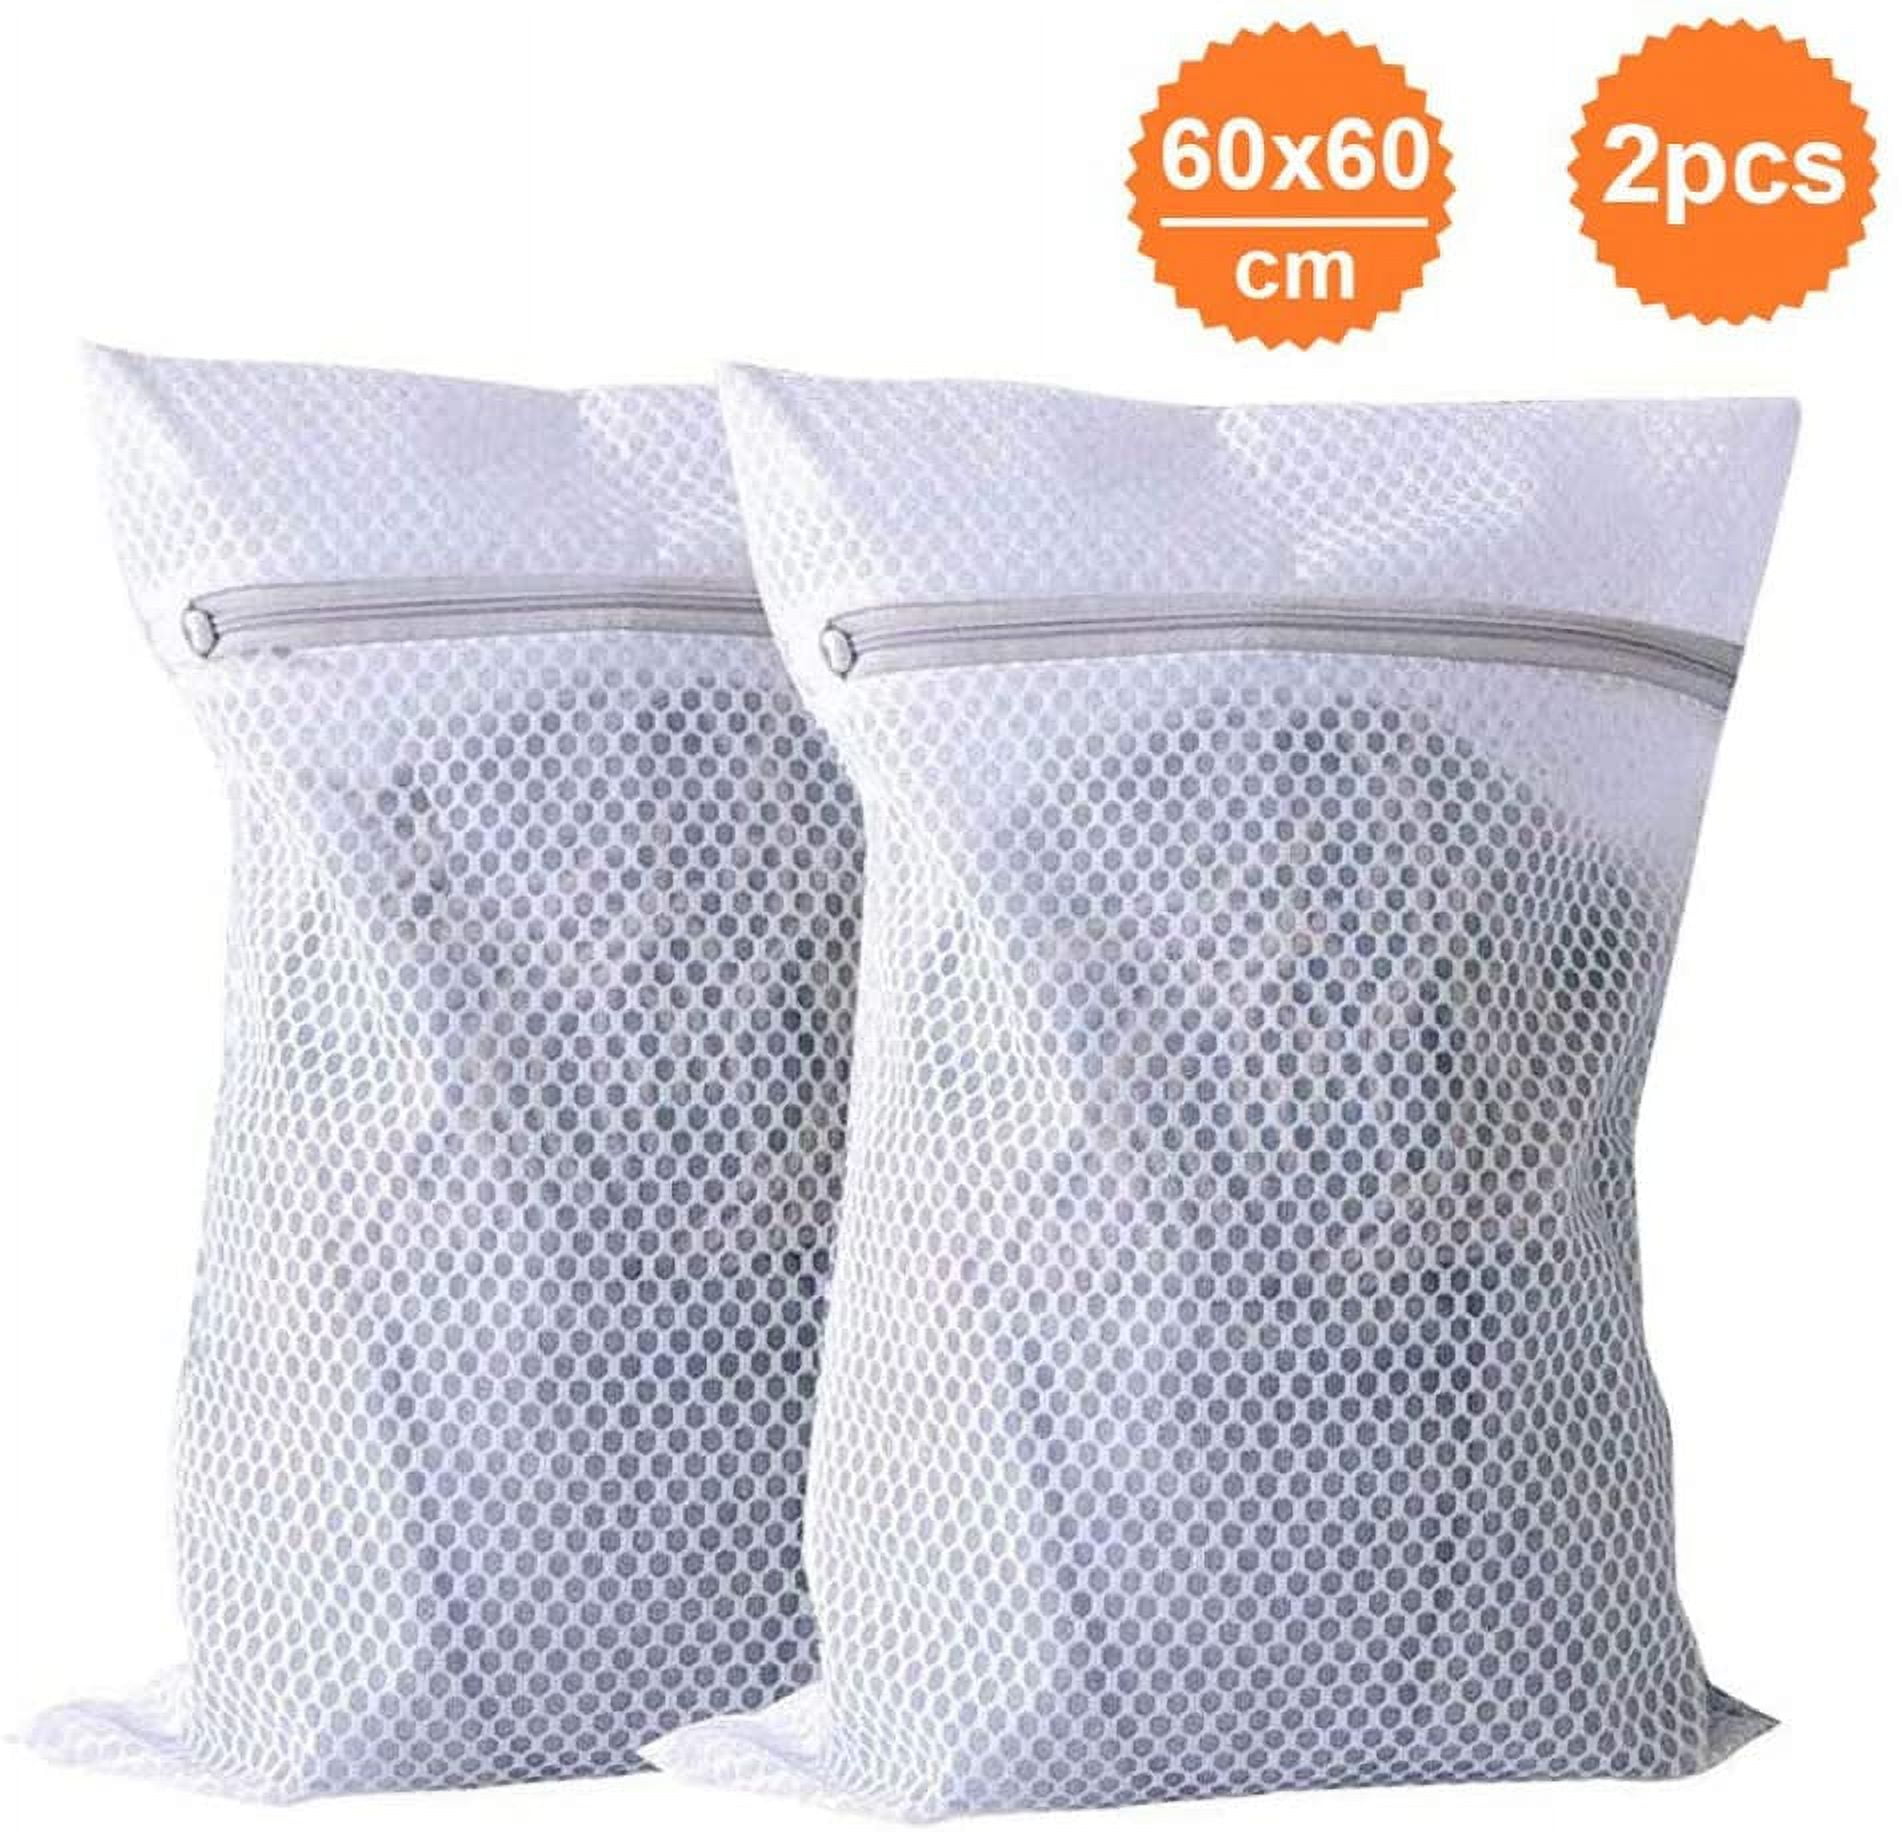 Large Mesh Laundry Bag, Pack of 4 Delicates Net Bags for Laundry